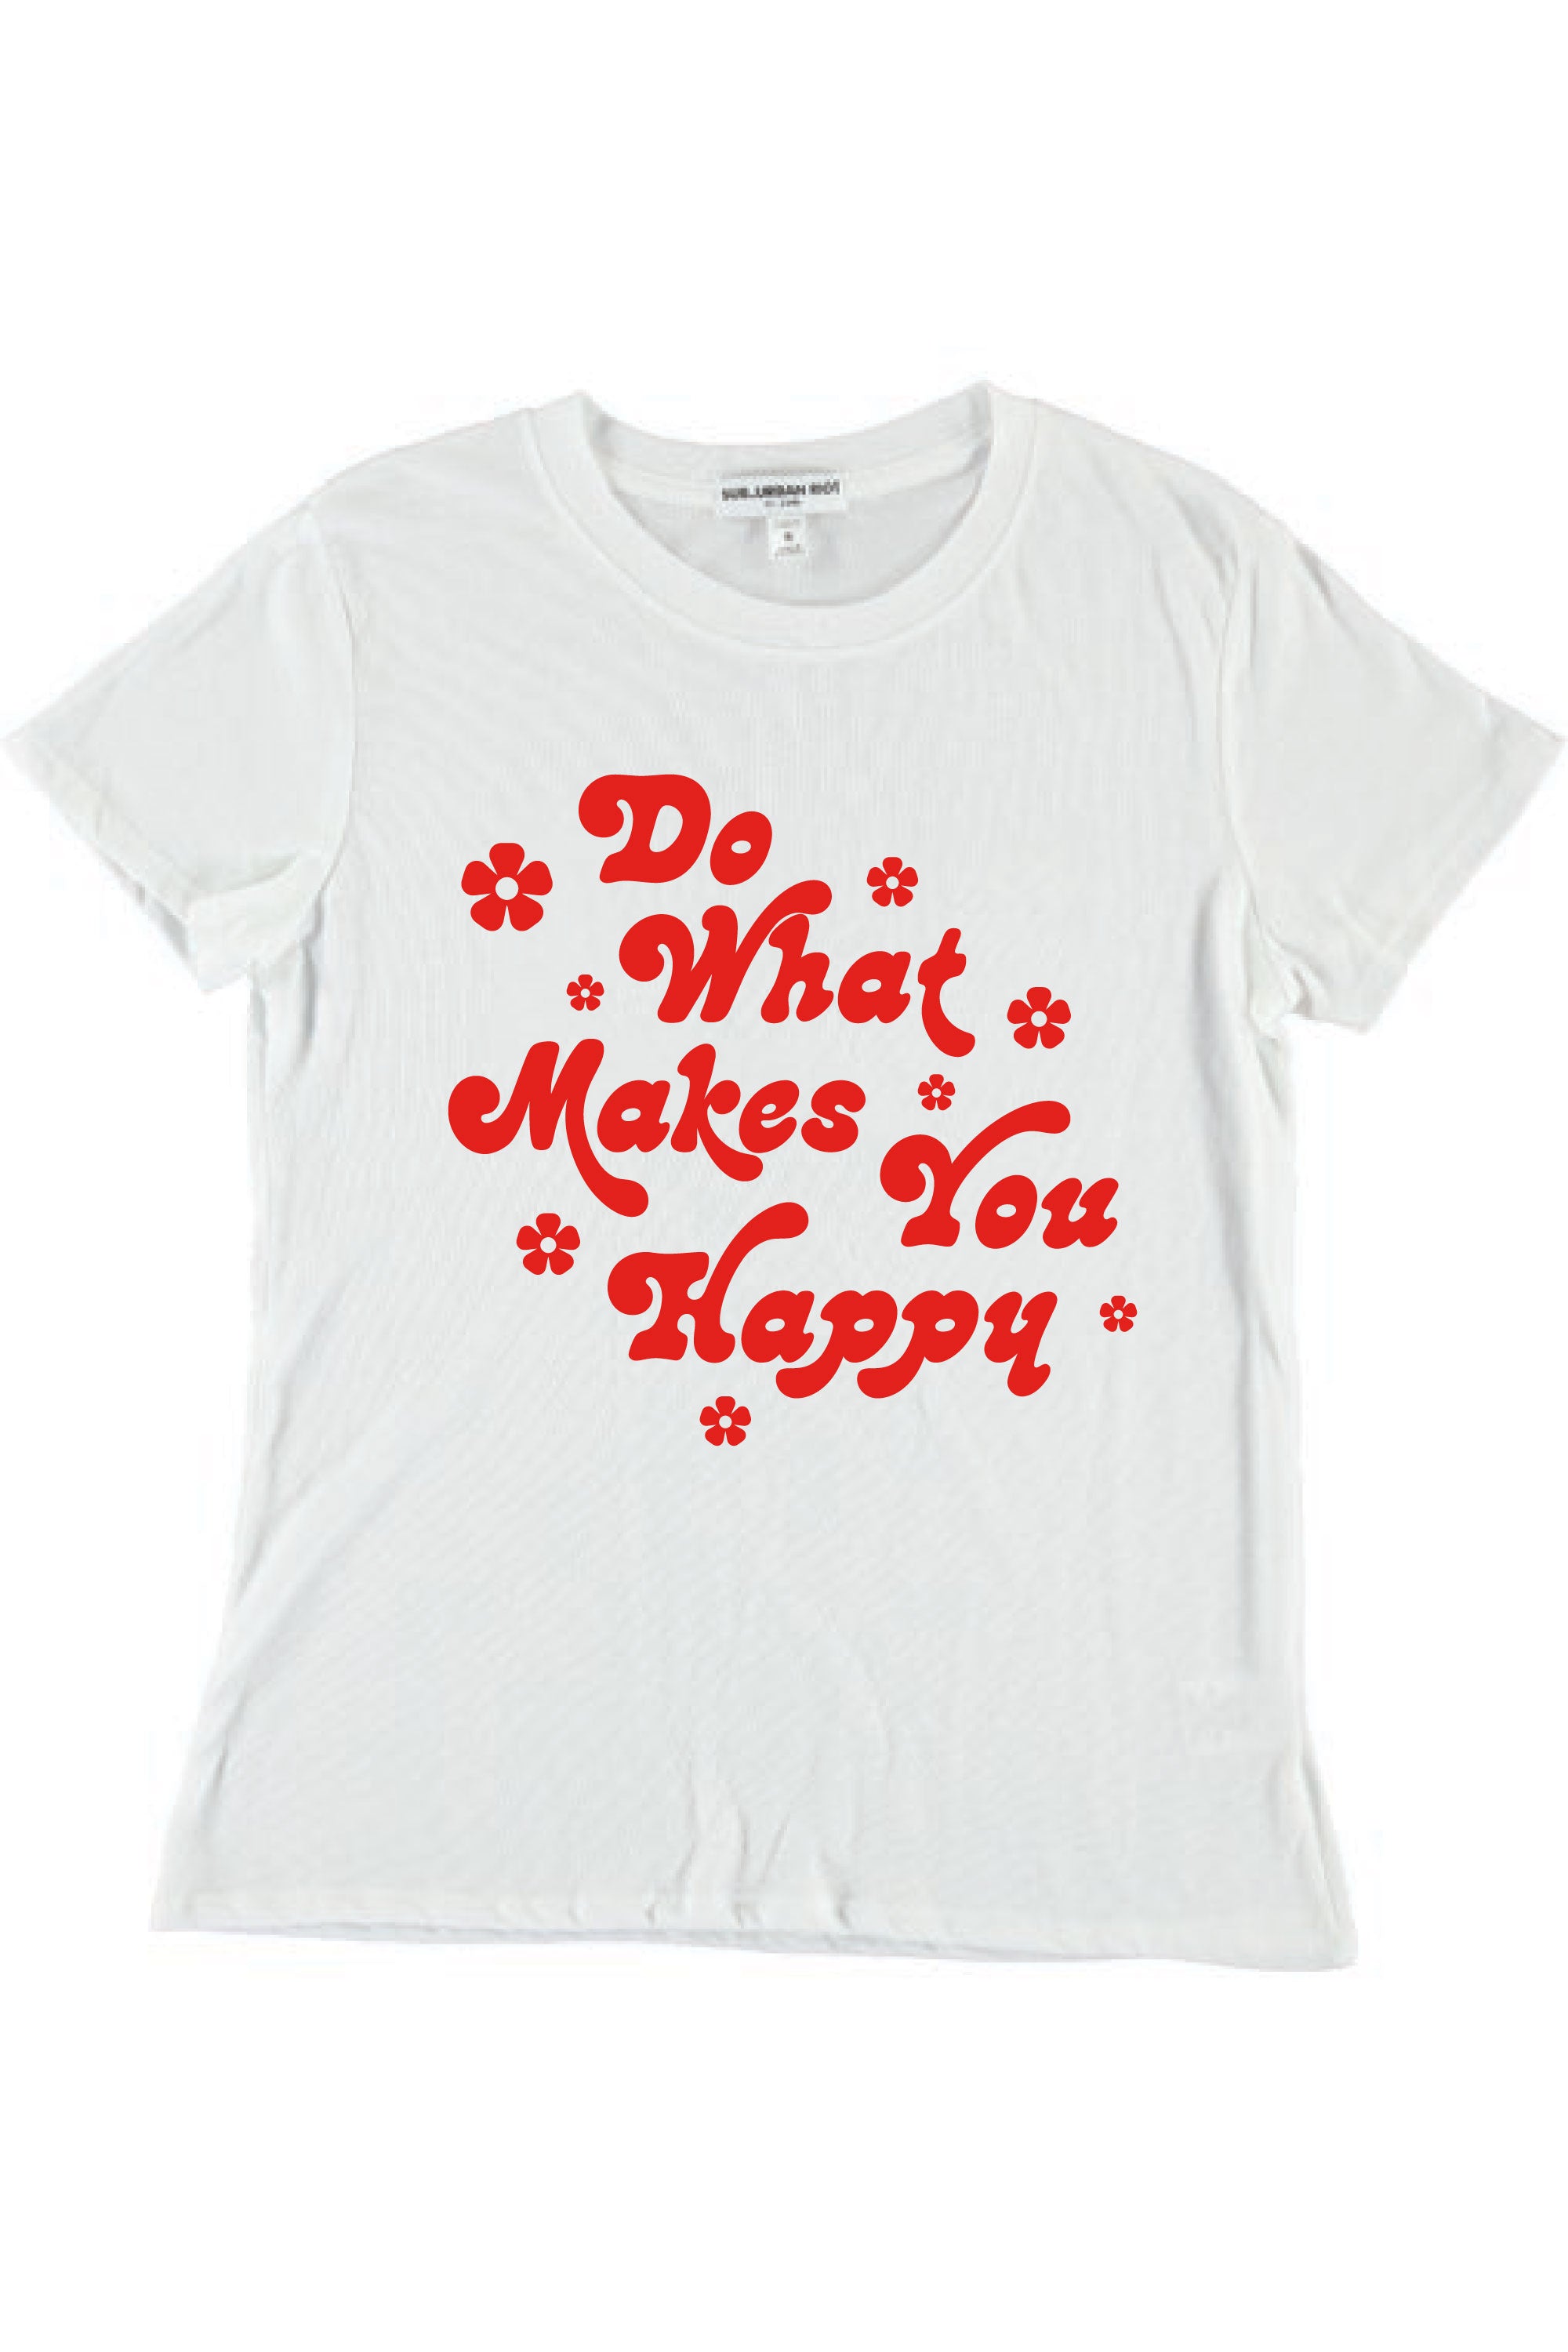 DO WHAT MAKES YOU HAPPY YOUTH SIZE LOOSE TEE